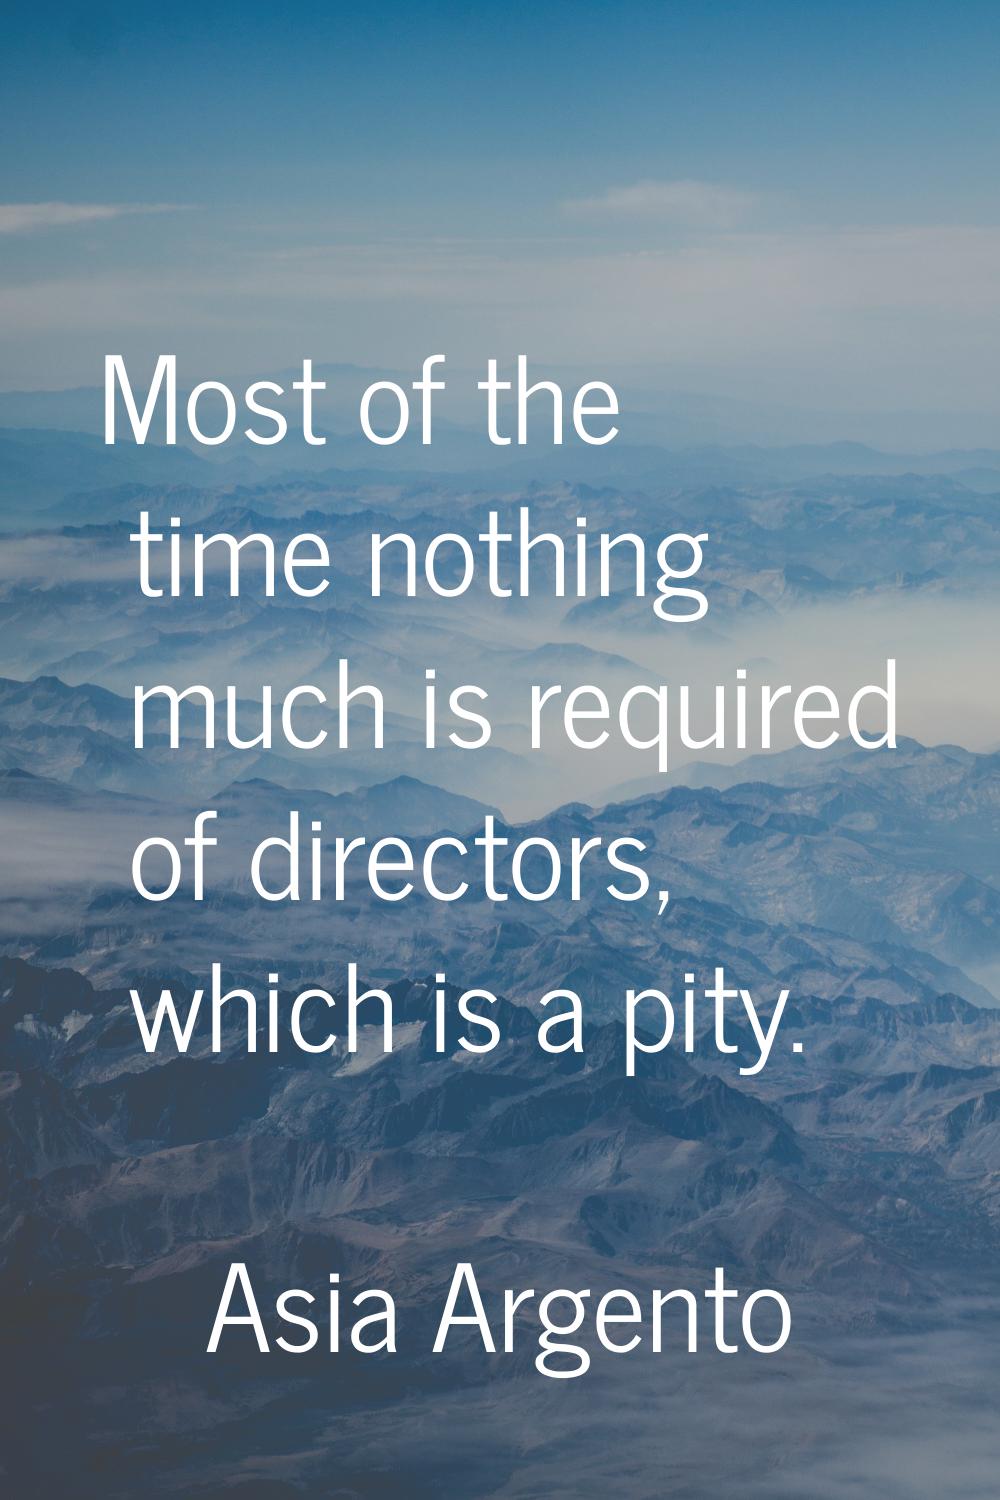 Most of the time nothing much is required of directors, which is a pity.